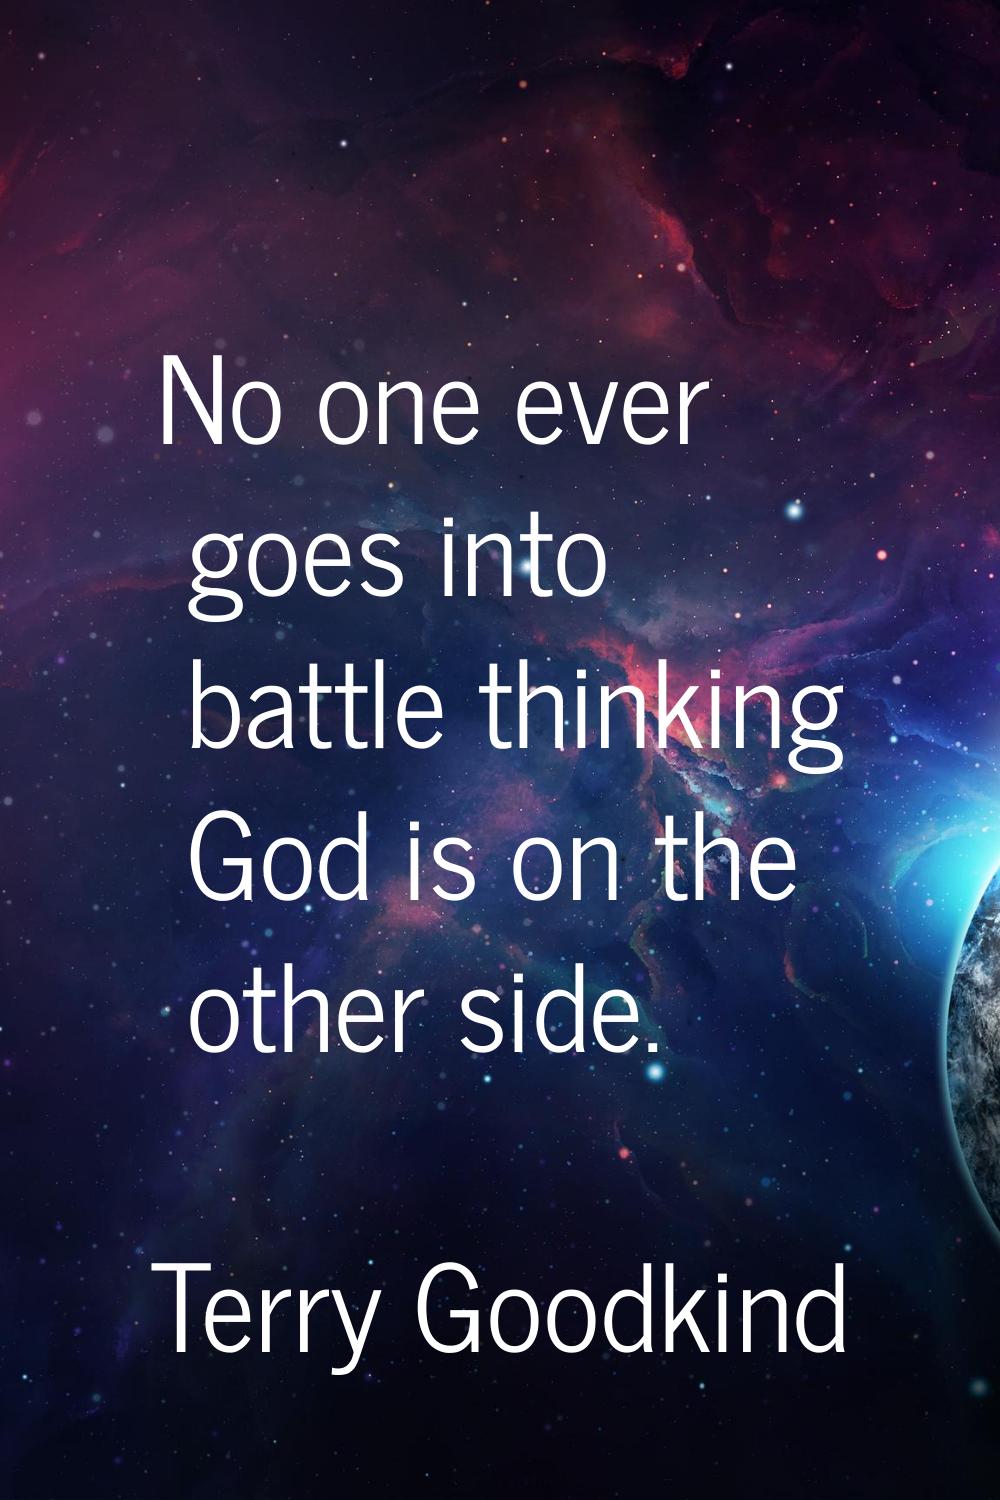 No one ever goes into battle thinking God is on the other side.